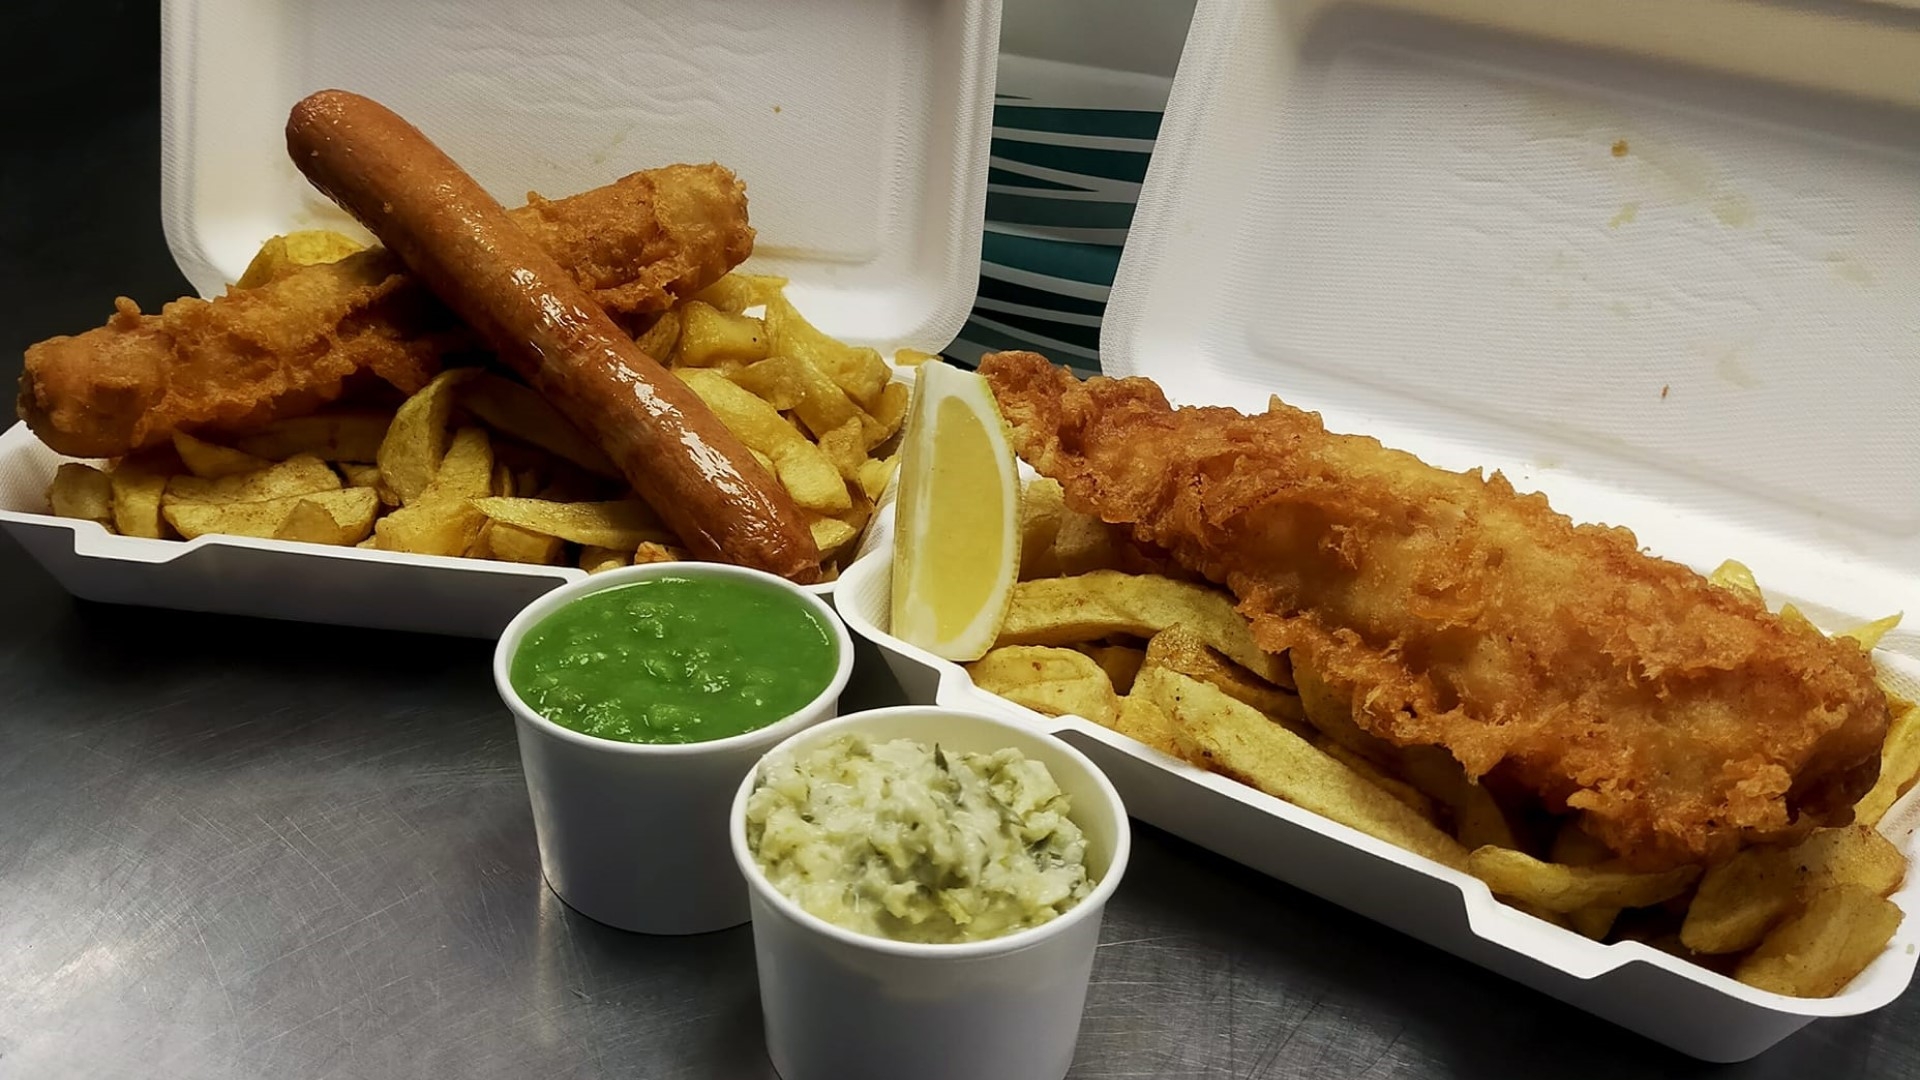 sausage, battered sausage, and battered fish with chips and mushy peas